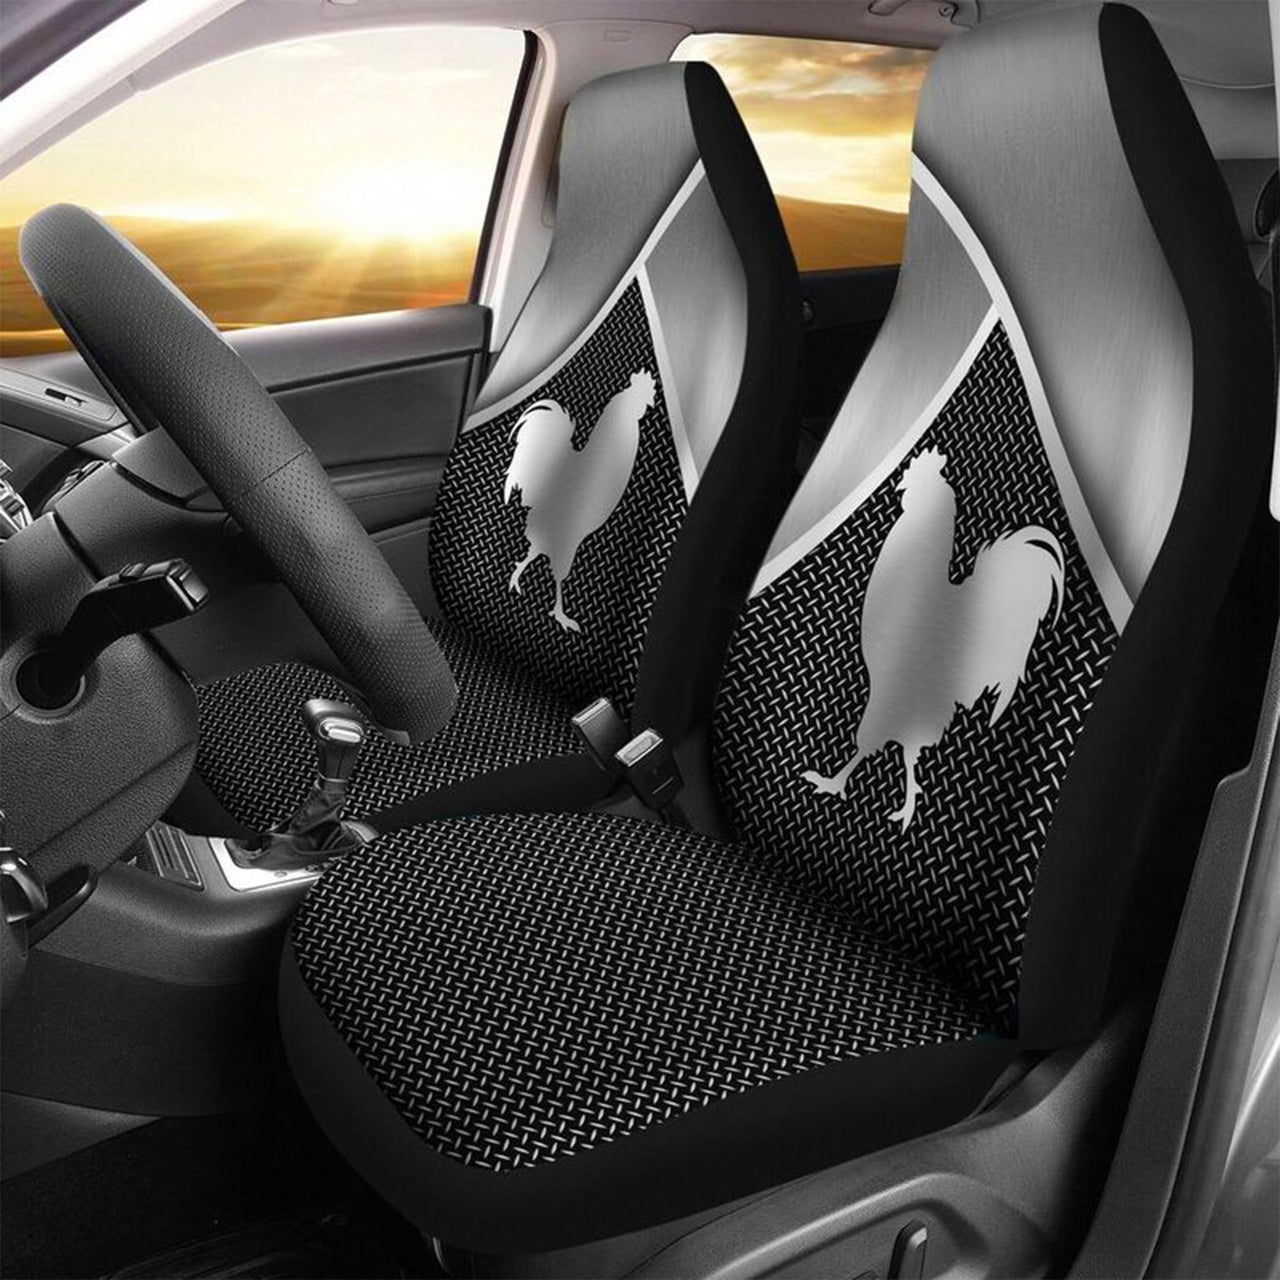 Custom Car Seat Cover Chicken Print 3D Silver Metal Seat Covers for Cars